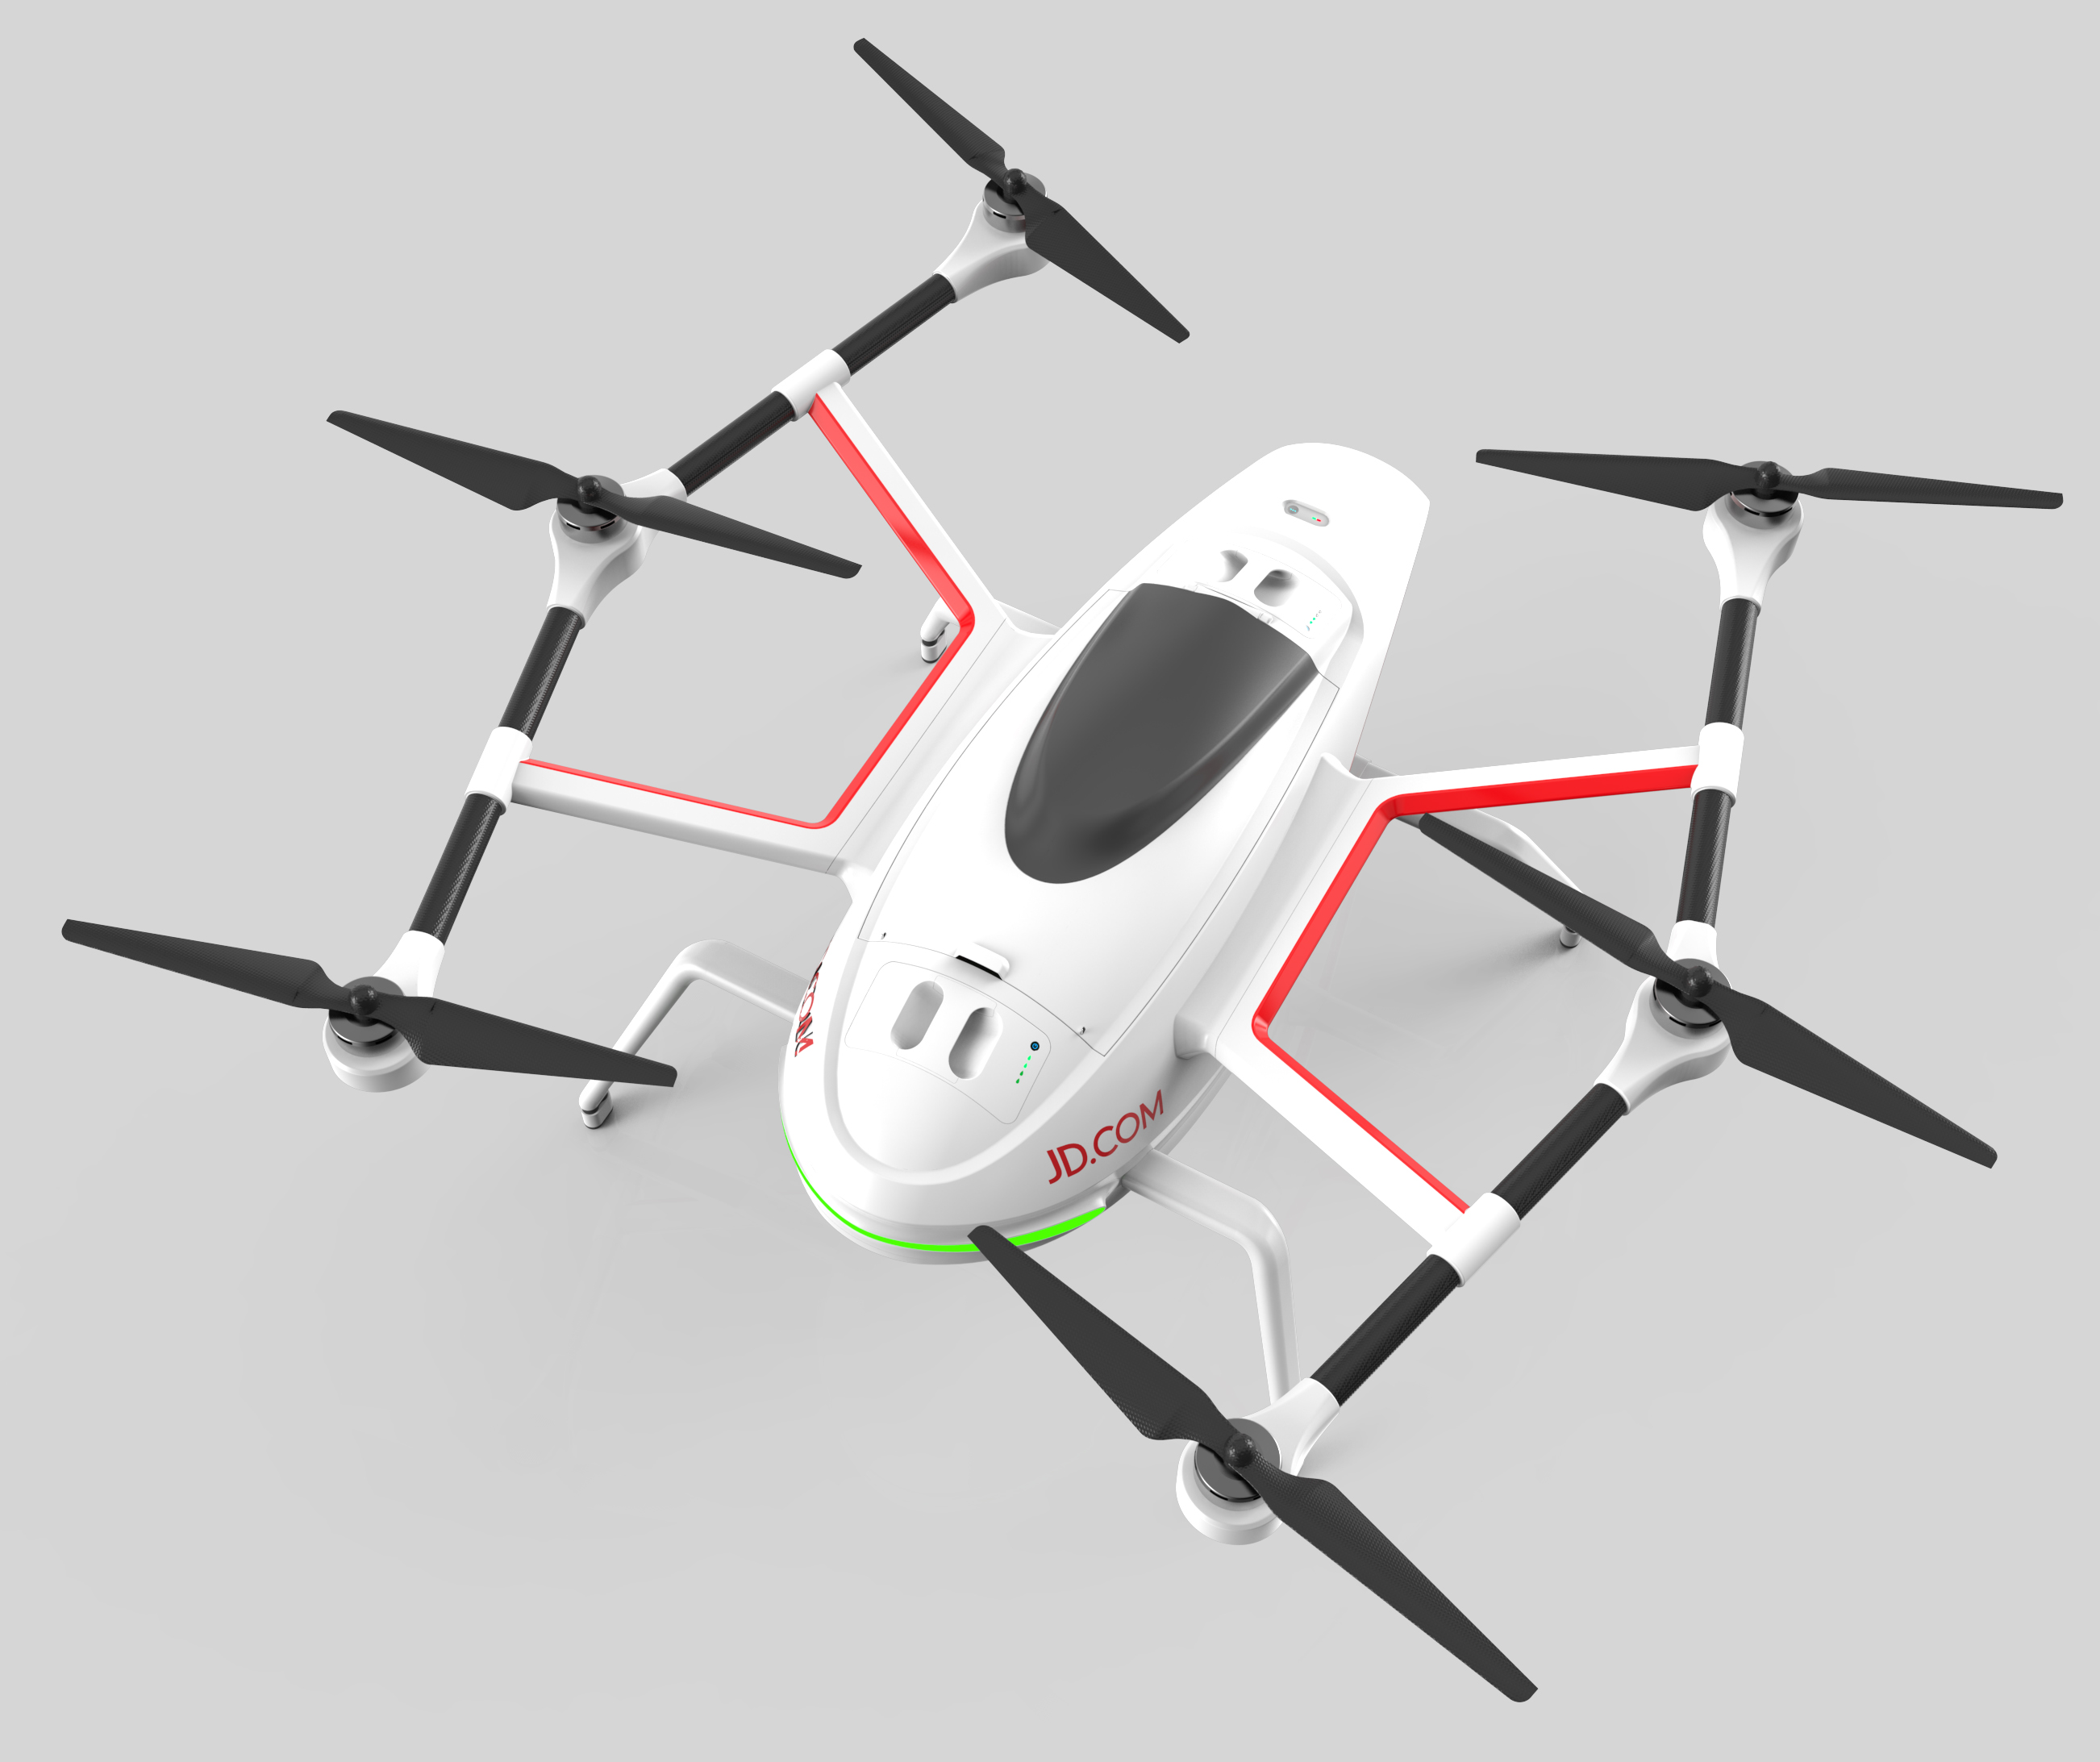 JDrones can fly up to 100 kph and deliver packages weighing up to 30 kg — with others being tested to carry as much as 200 kg.